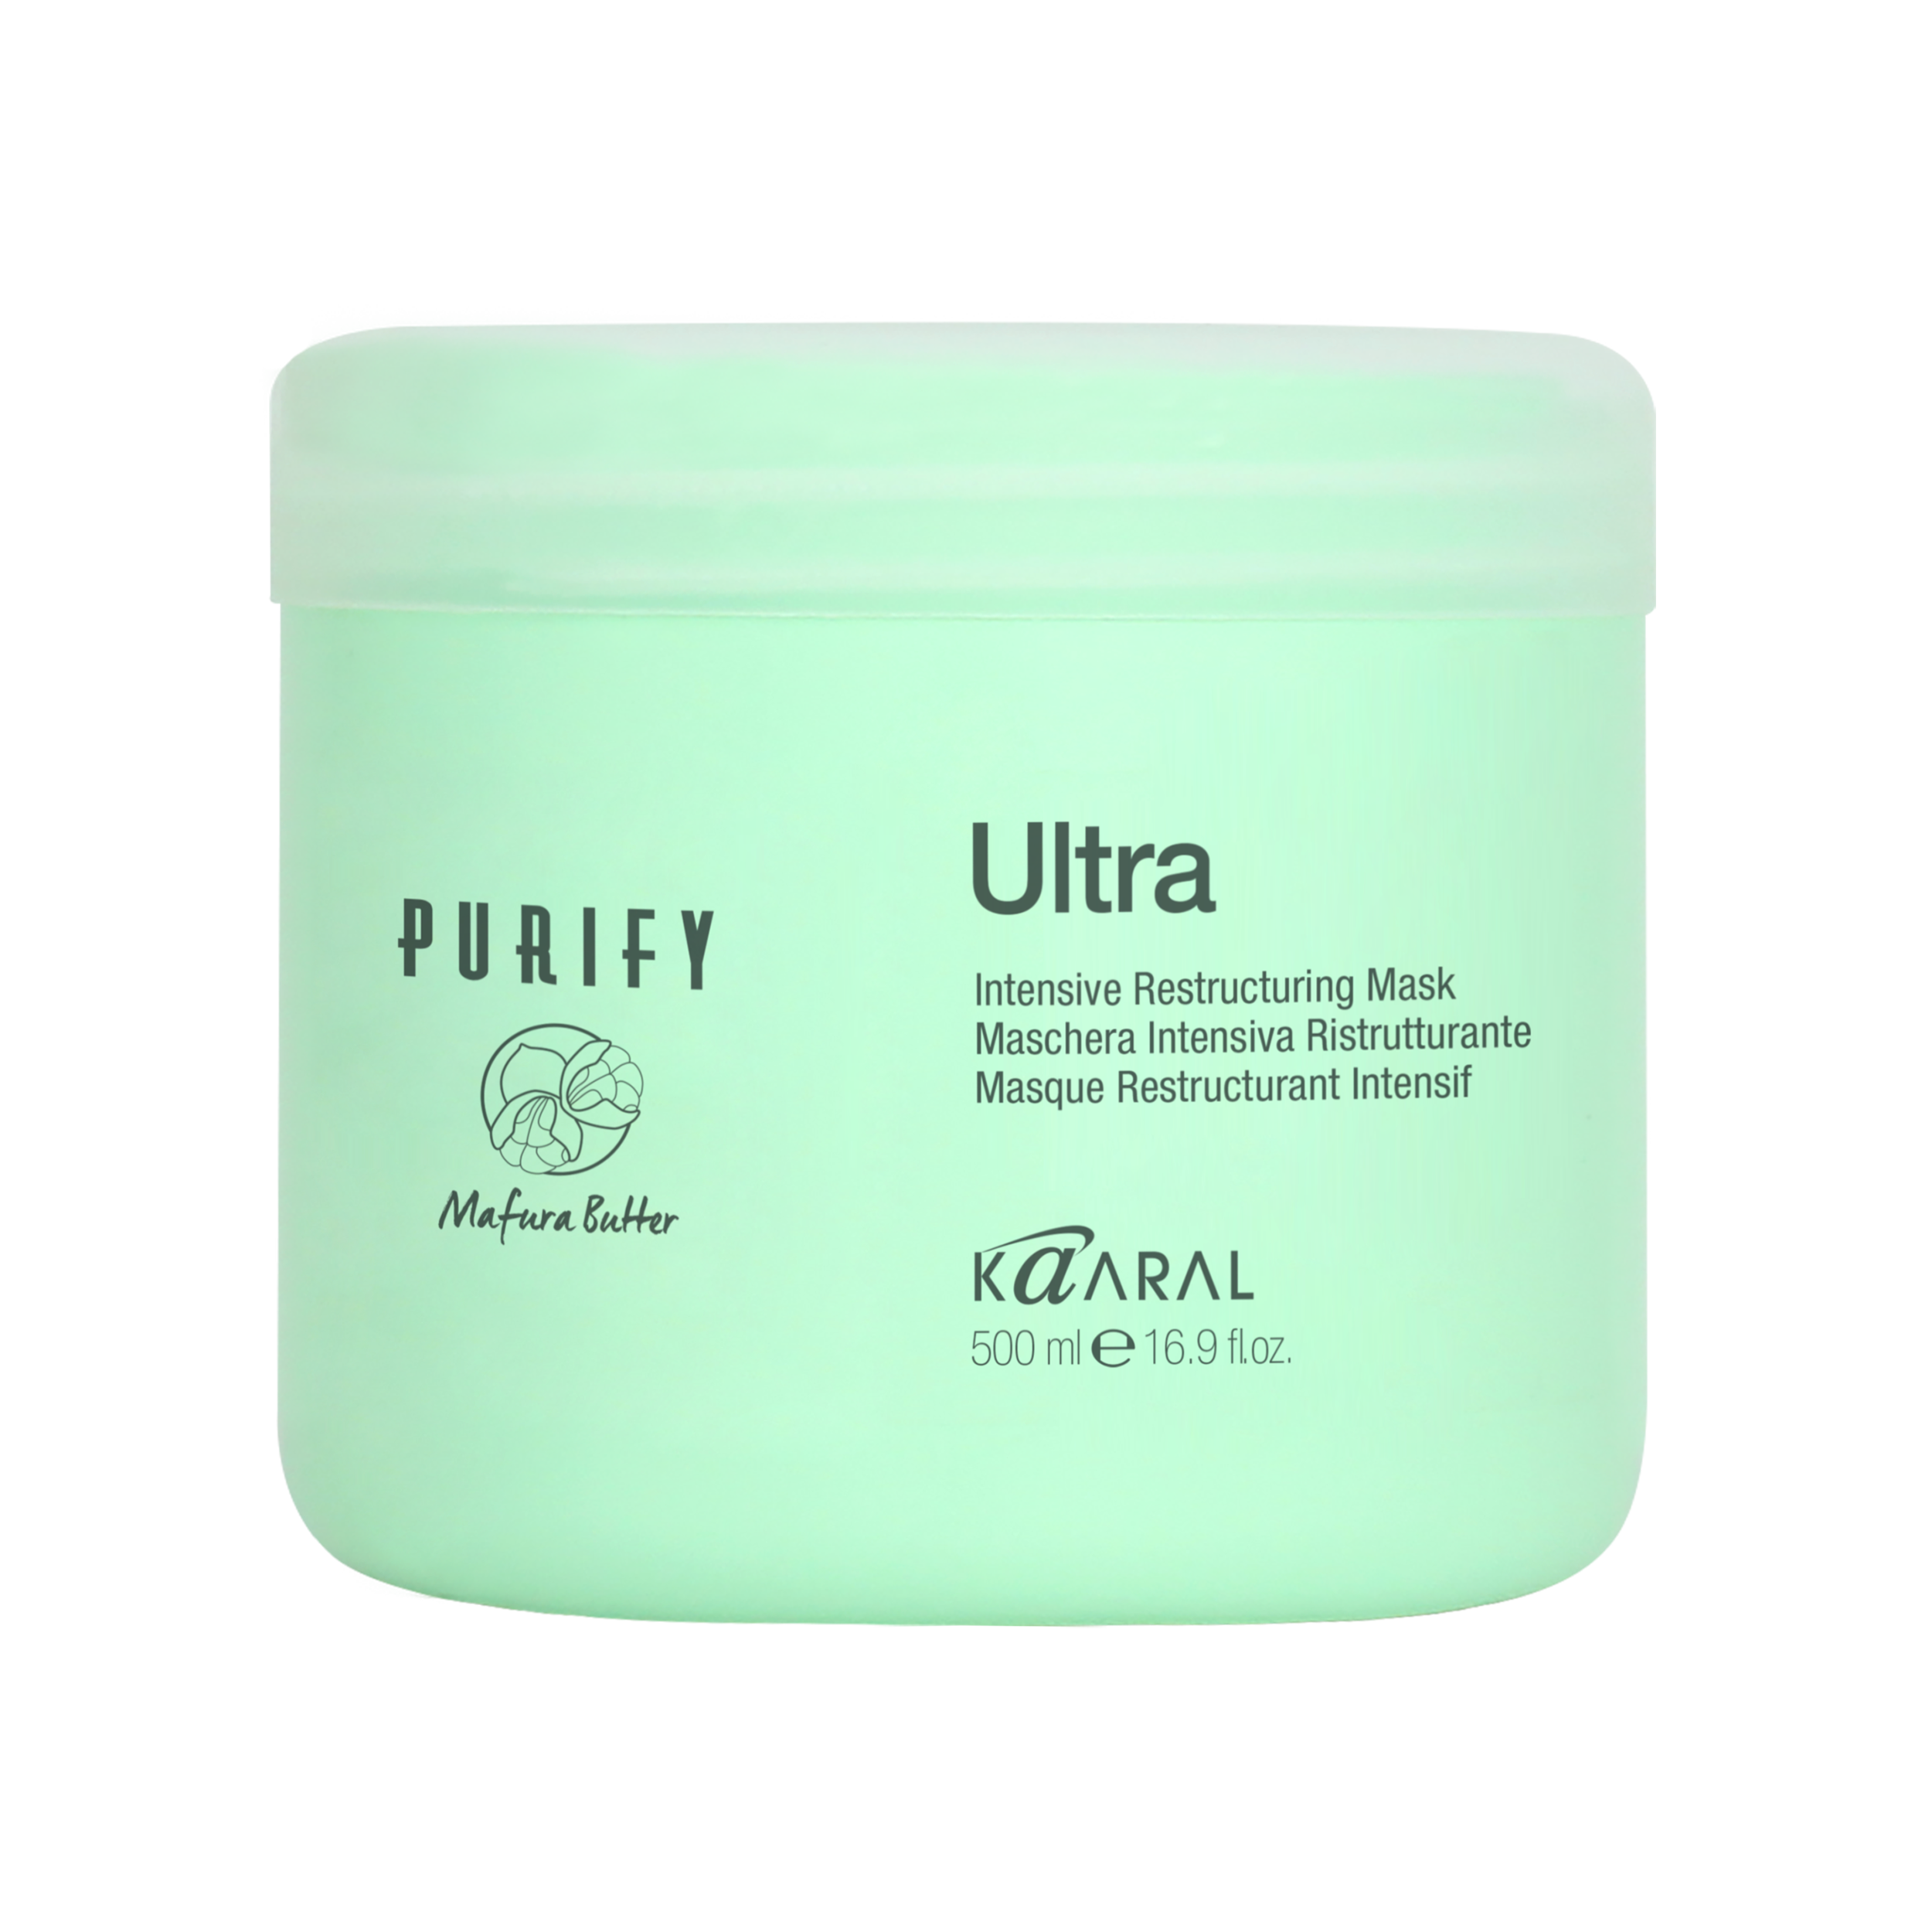 Kaaral - Purify ULTRA Intensive Restructuring Mask - Creata Beauty - Professional Beauty Products